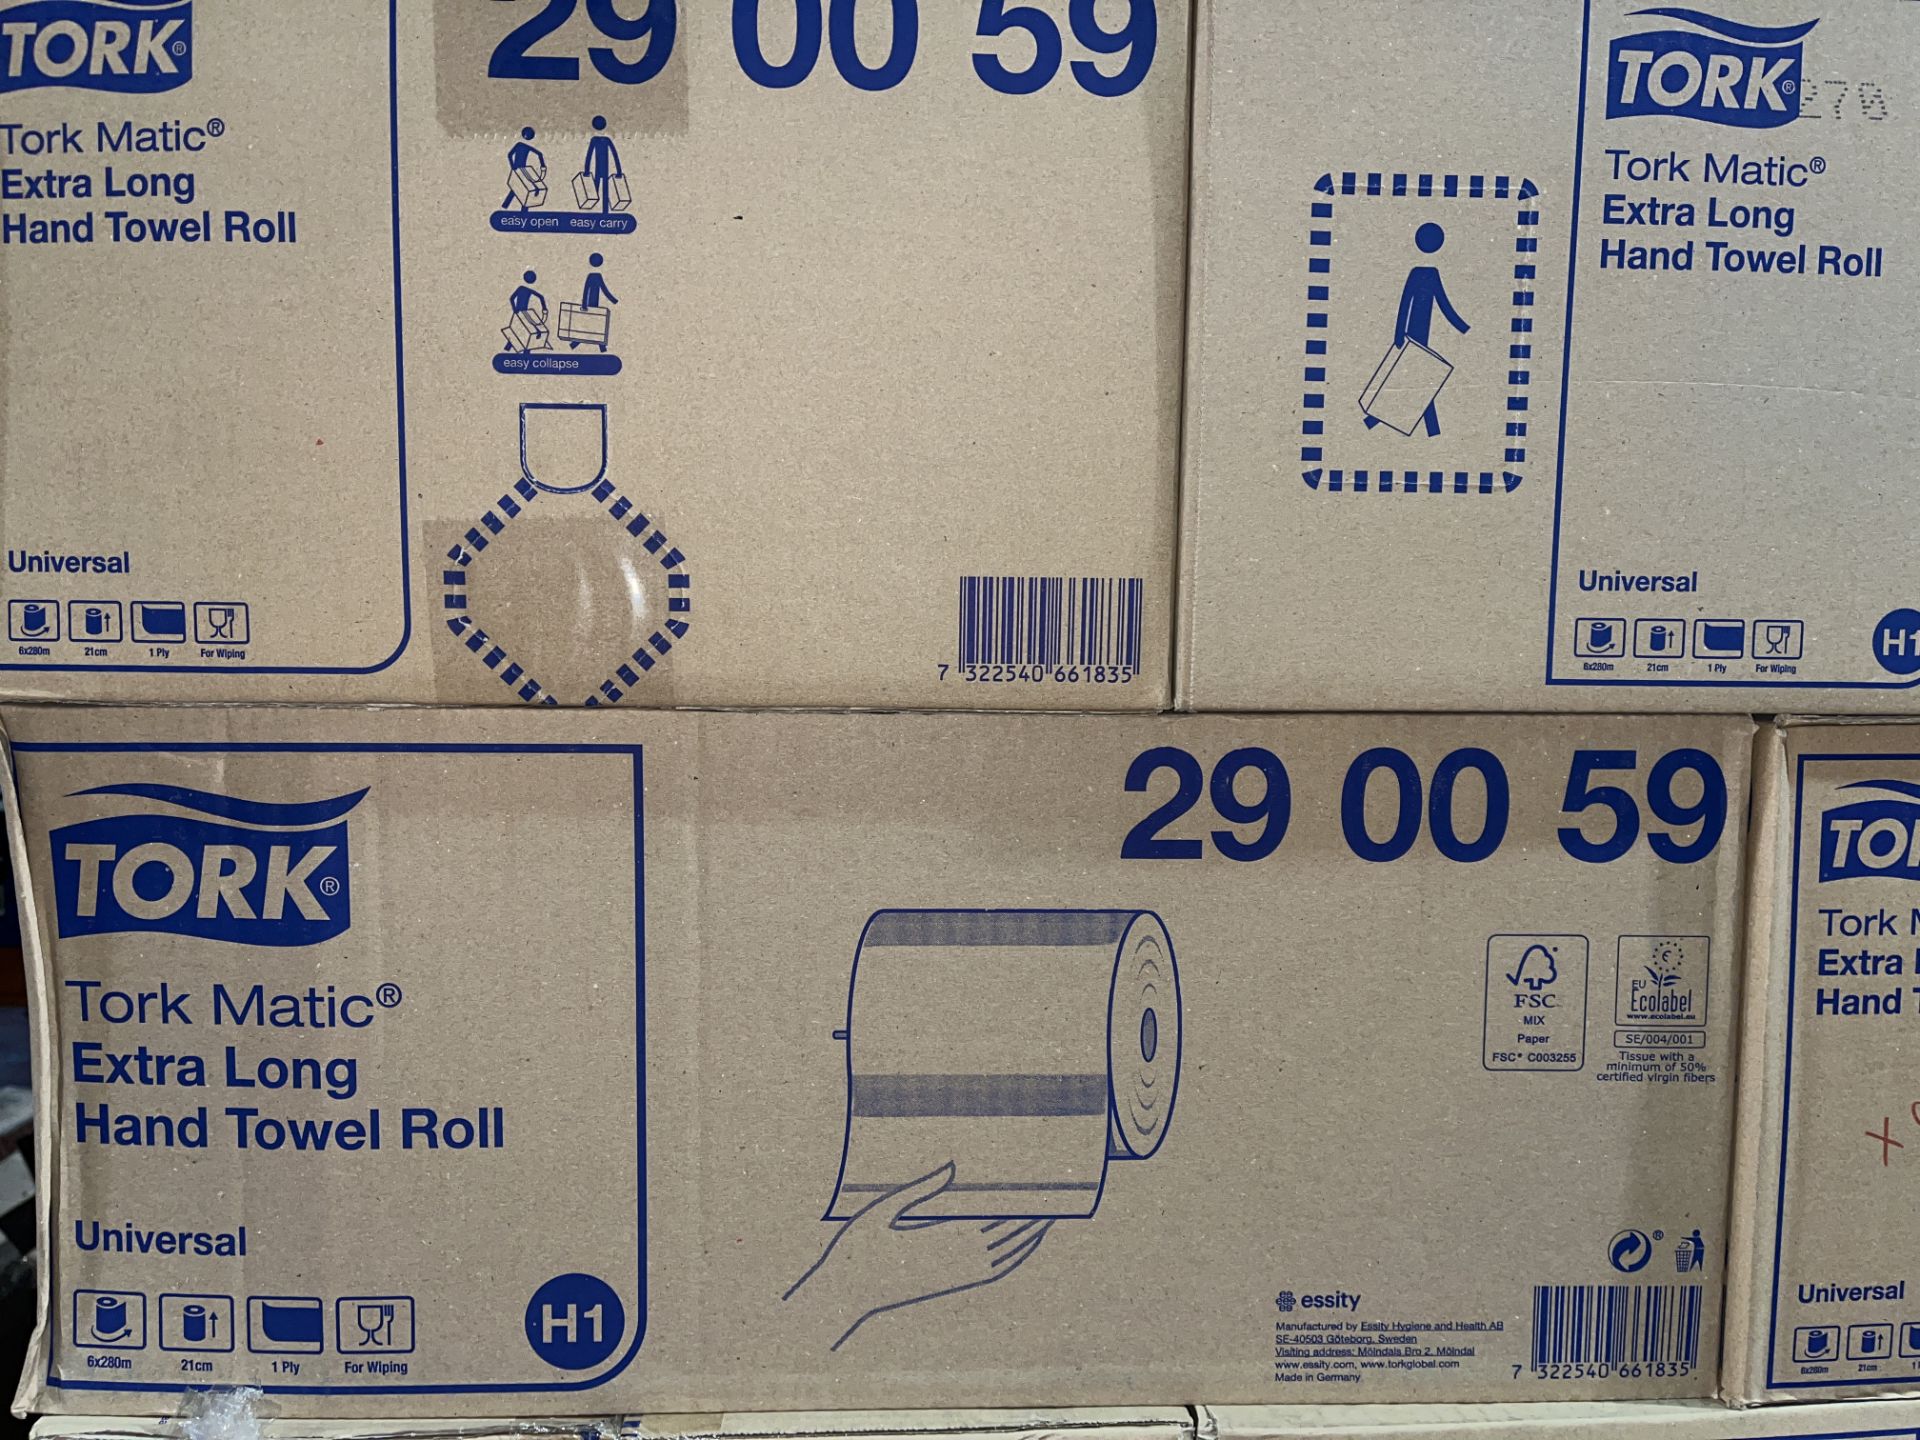 3 X BRAND NEW PACKS OF 6 TORK 290059 MATIC EXTRA LONG PAPER HAND TOWEL ROLLS UNIVERSAL WHITE RRP £